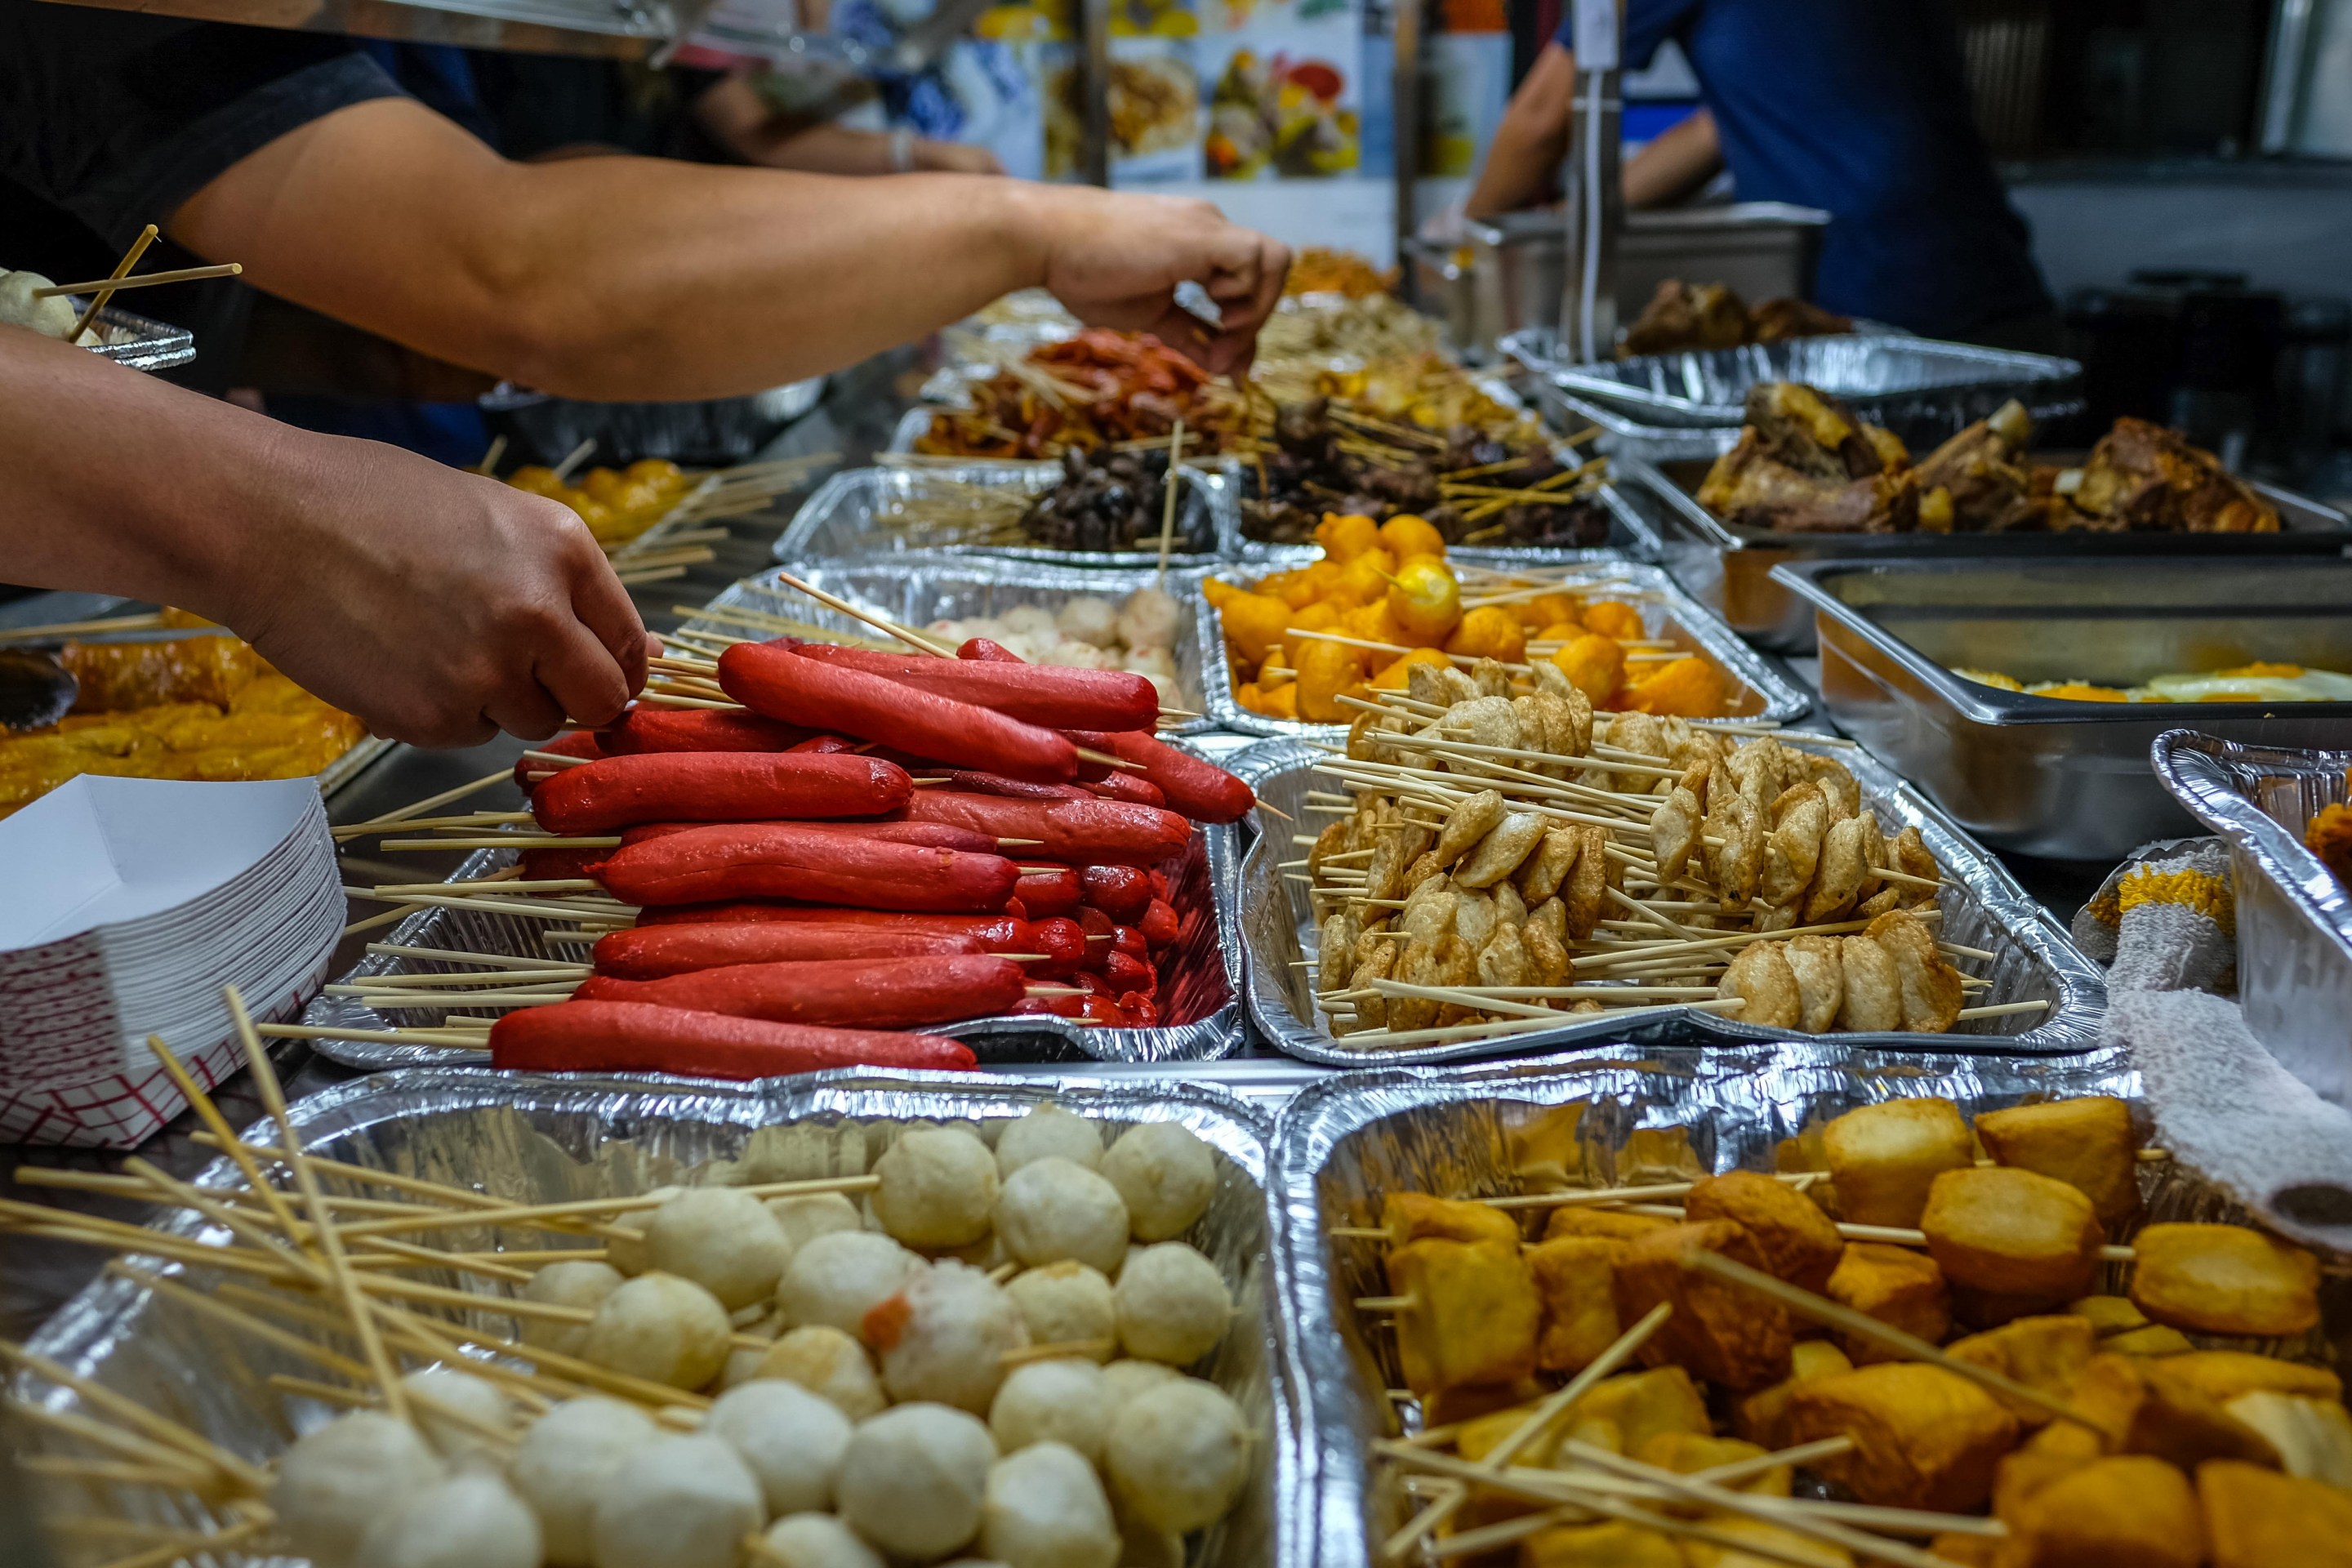 Numerous trays of skewers of all shapes and sizes sit in aluminum trays, waiting for people to take them.